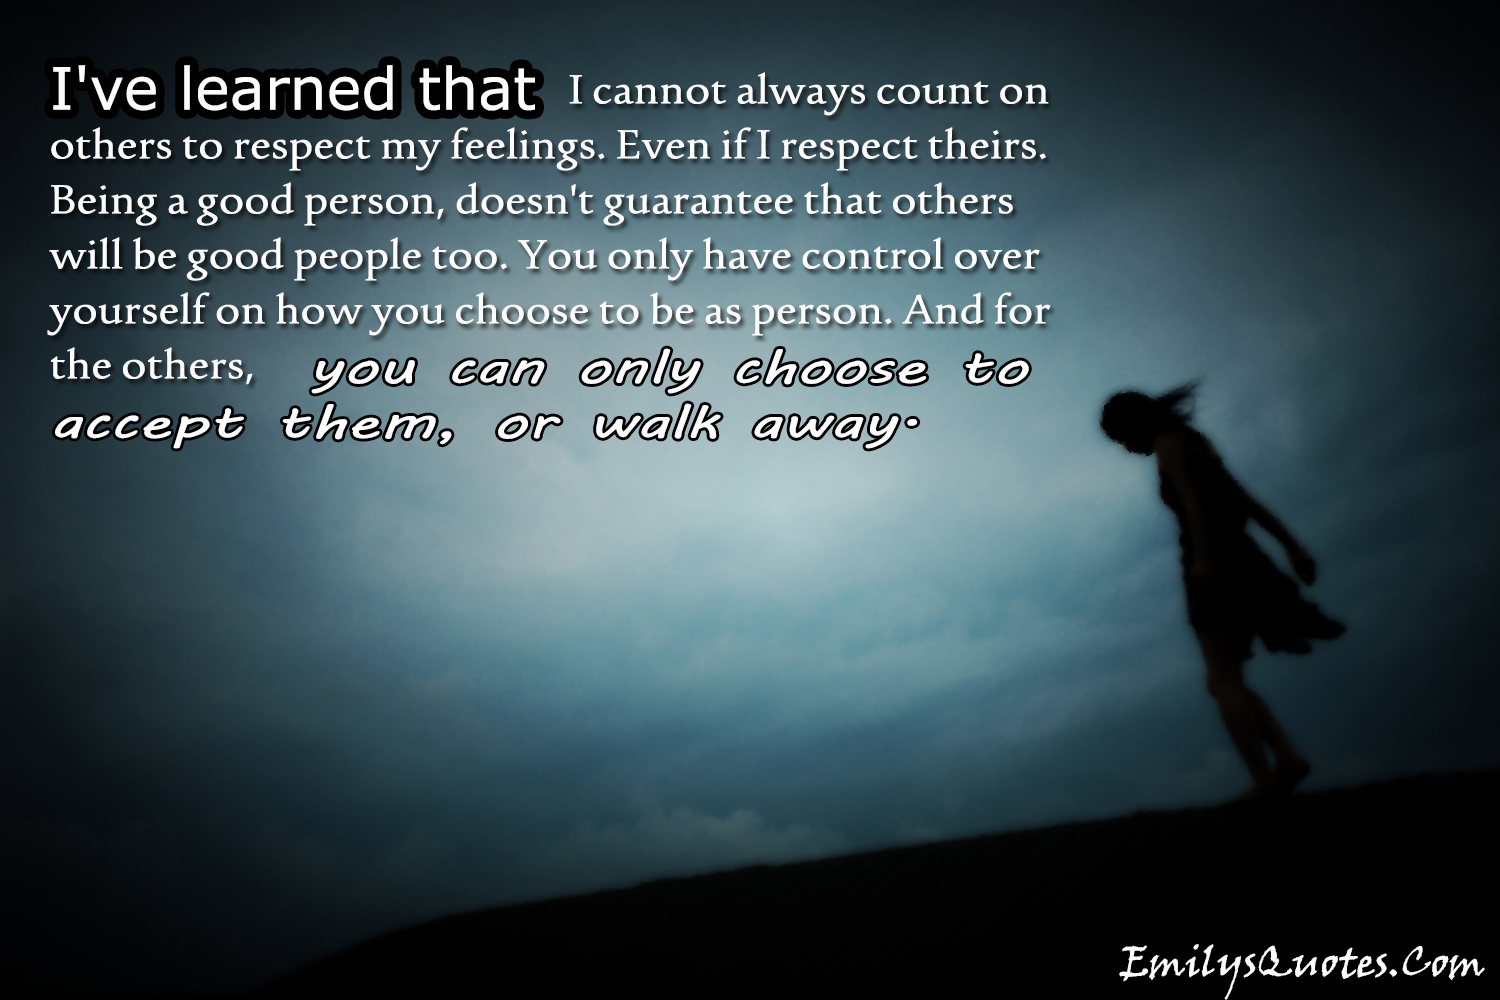 I’ve learned that I cannot always count on others to respect